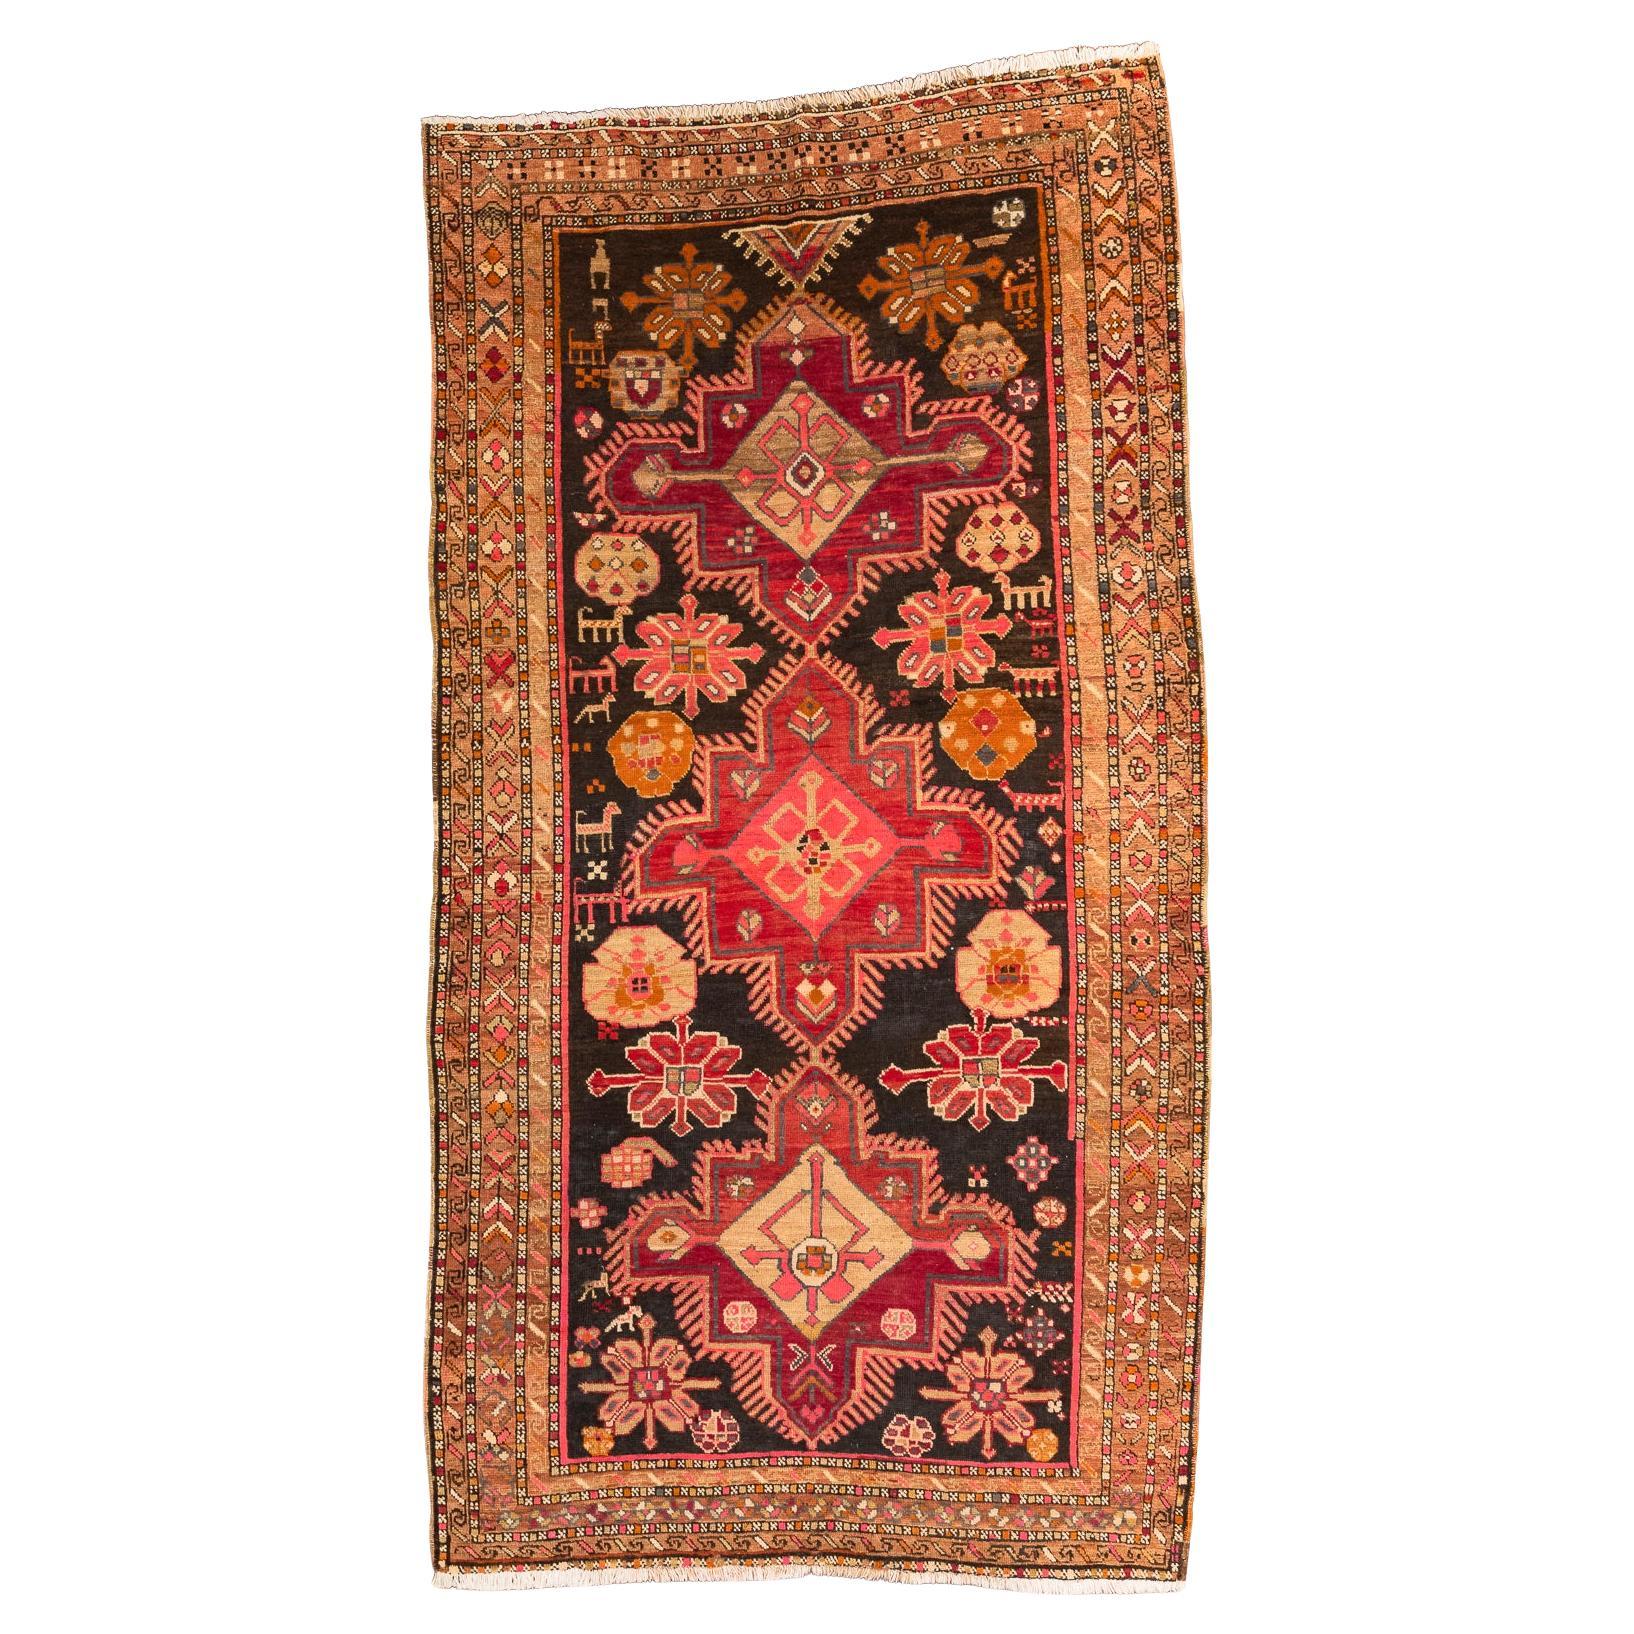 Karabagh – South Caucasus

This cheerful and jovial Karabagh rug features a very traditional design. It presents a lively combination of bold colours that stand out from the rug’s central black field and are accompanied by stylized geometric and